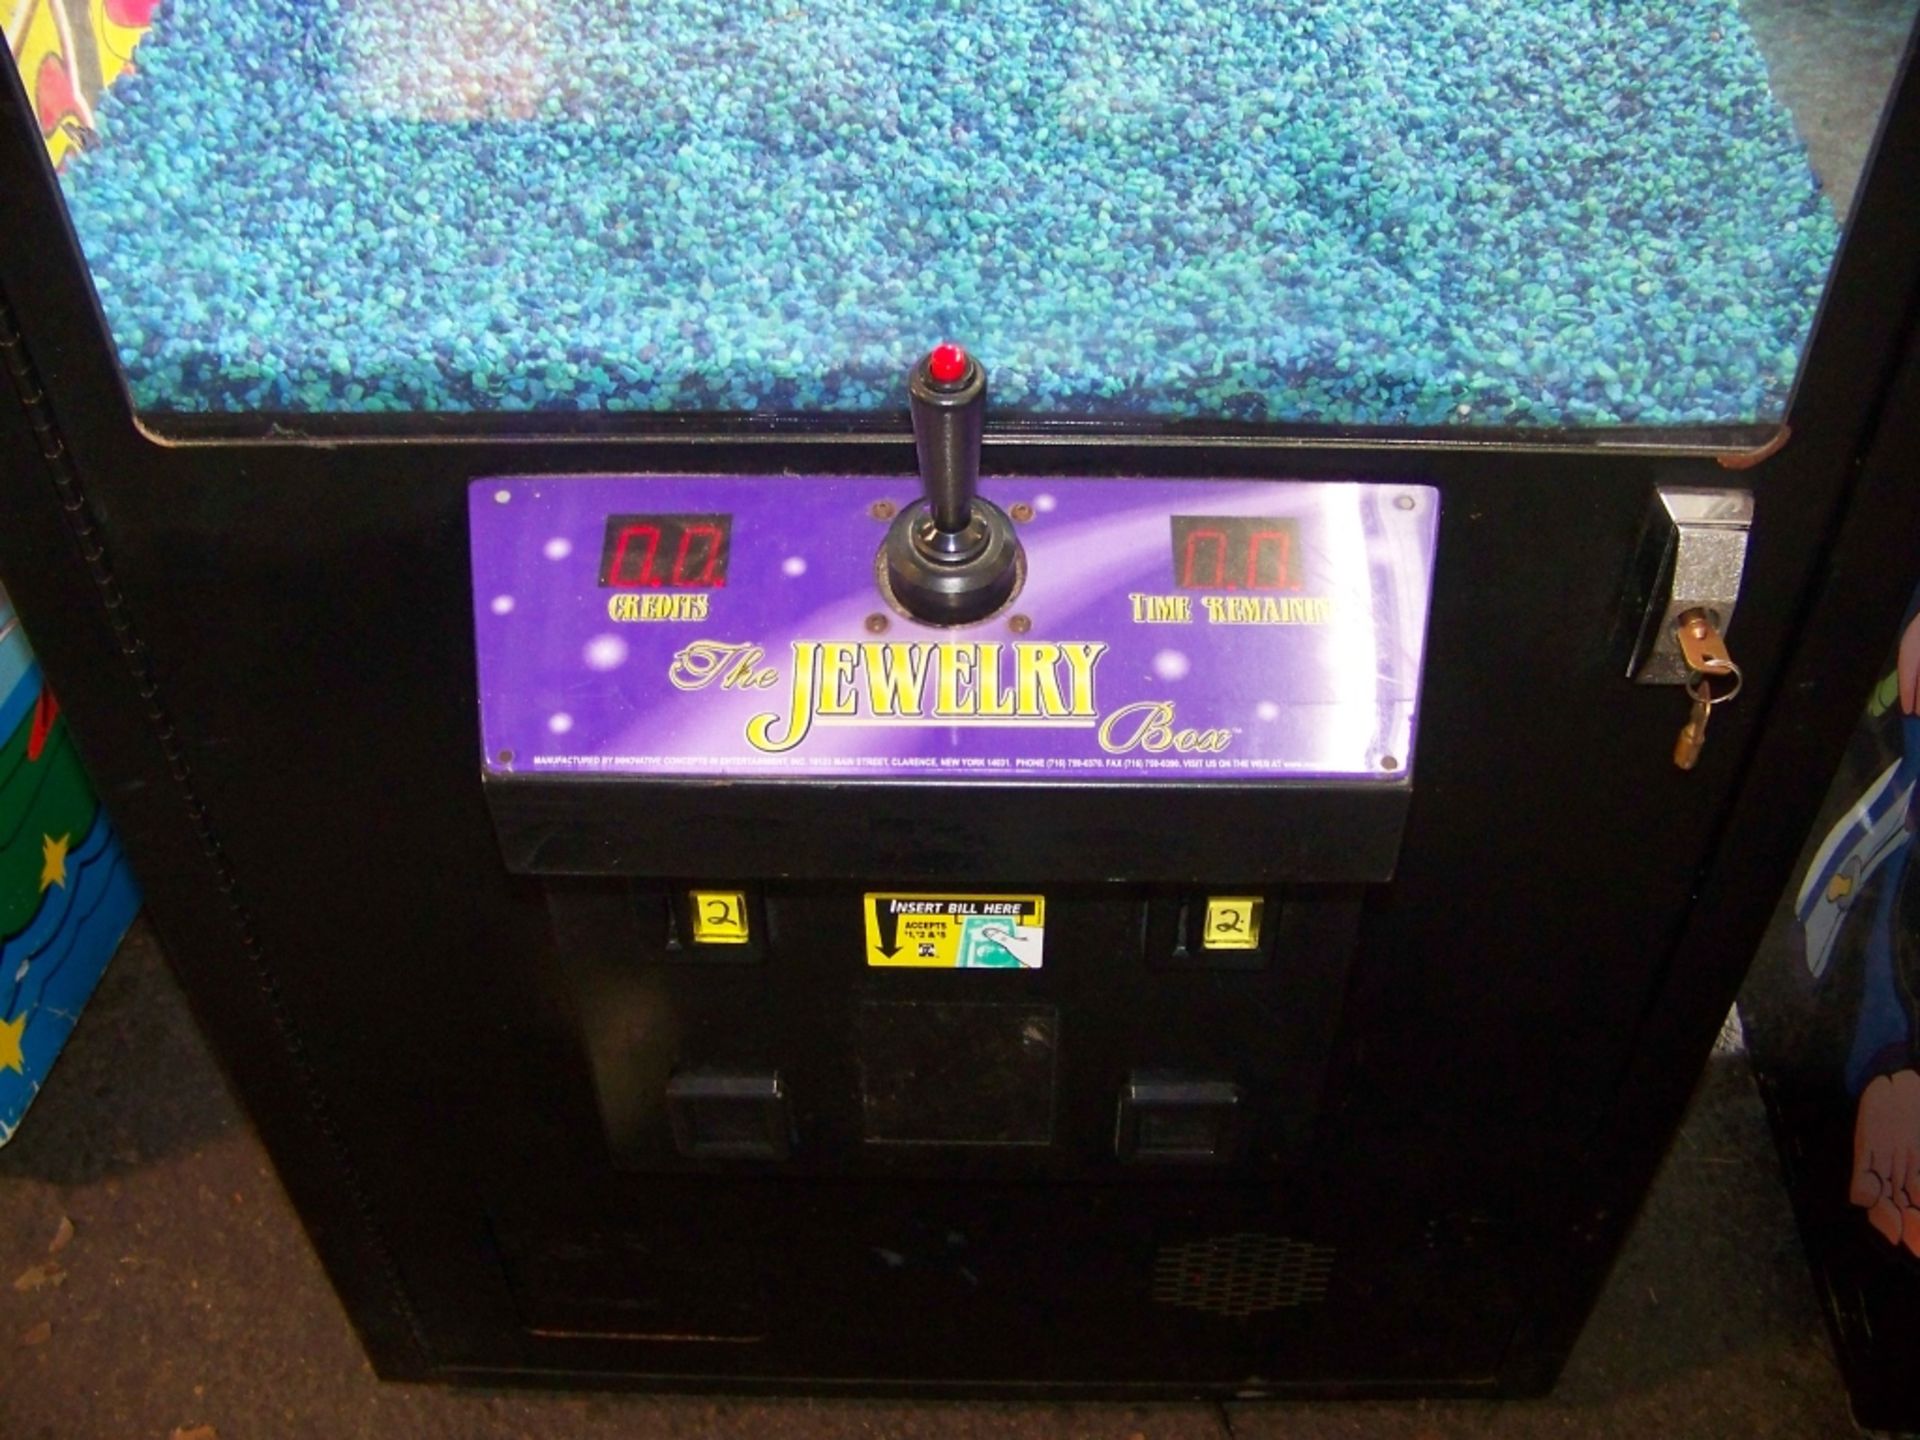 31"" ICE JEWELRY BOX PLUSH CLAW CRANE MACHINE Item is in used condition. Evidence of wear and - Image 6 of 6